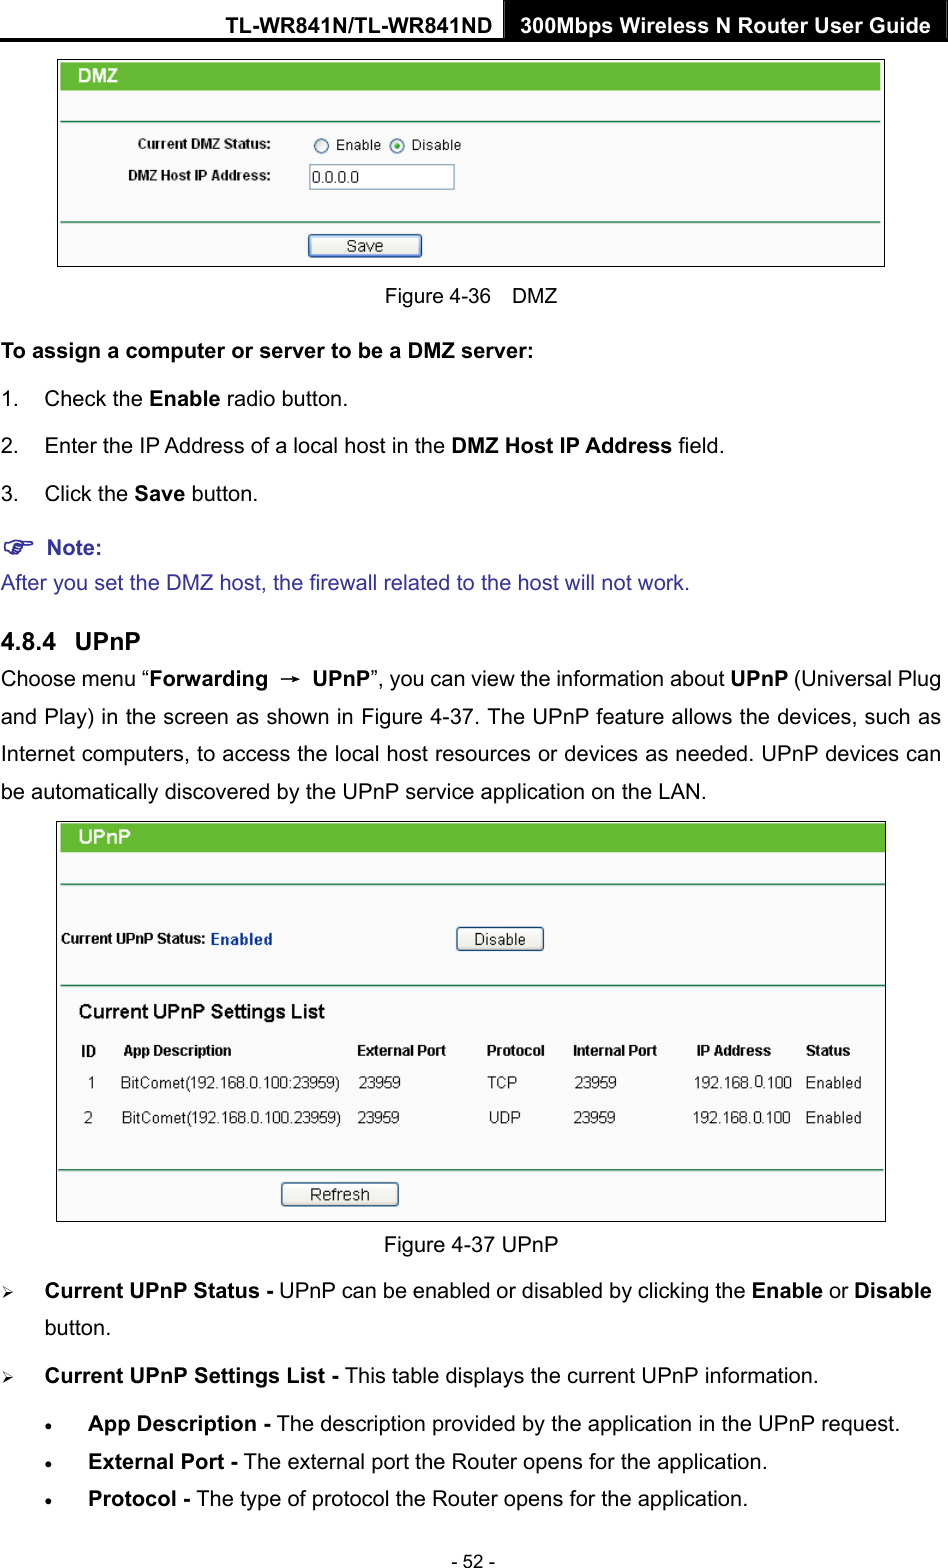 TL-WR841N/TL-WR841ND 300Mbps Wireless N Router User Guide - 52 -  Figure 4-36  DMZ To assign a computer or server to be a DMZ server:   1. Check the Enable radio button. 2.  Enter the IP Address of a local host in the DMZ Host IP Address field. 3. Click the Save button. ) Note:  After you set the DMZ host, the firewall related to the host will not work. 4.8.4  UPnP Choose menu “Forwarding  → UPnP”, you can view the information about UPnP (Universal Plug and Play) in the screen as shown in Figure 4-37. The UPnP feature allows the devices, such as Internet computers, to access the local host resources or devices as needed. UPnP devices can be automatically discovered by the UPnP service application on the LAN.    Figure 4-37 UPnP   ¾ Current UPnP Status - UPnP can be enabled or disabled by clicking the Enable or Disable button.  ¾ Current UPnP Settings List - This table displays the current UPnP information. • App Description - The description provided by the application in the UPnP request. • External Port - The external port the Router opens for the application. • Protocol - The type of protocol the Router opens for the application. 